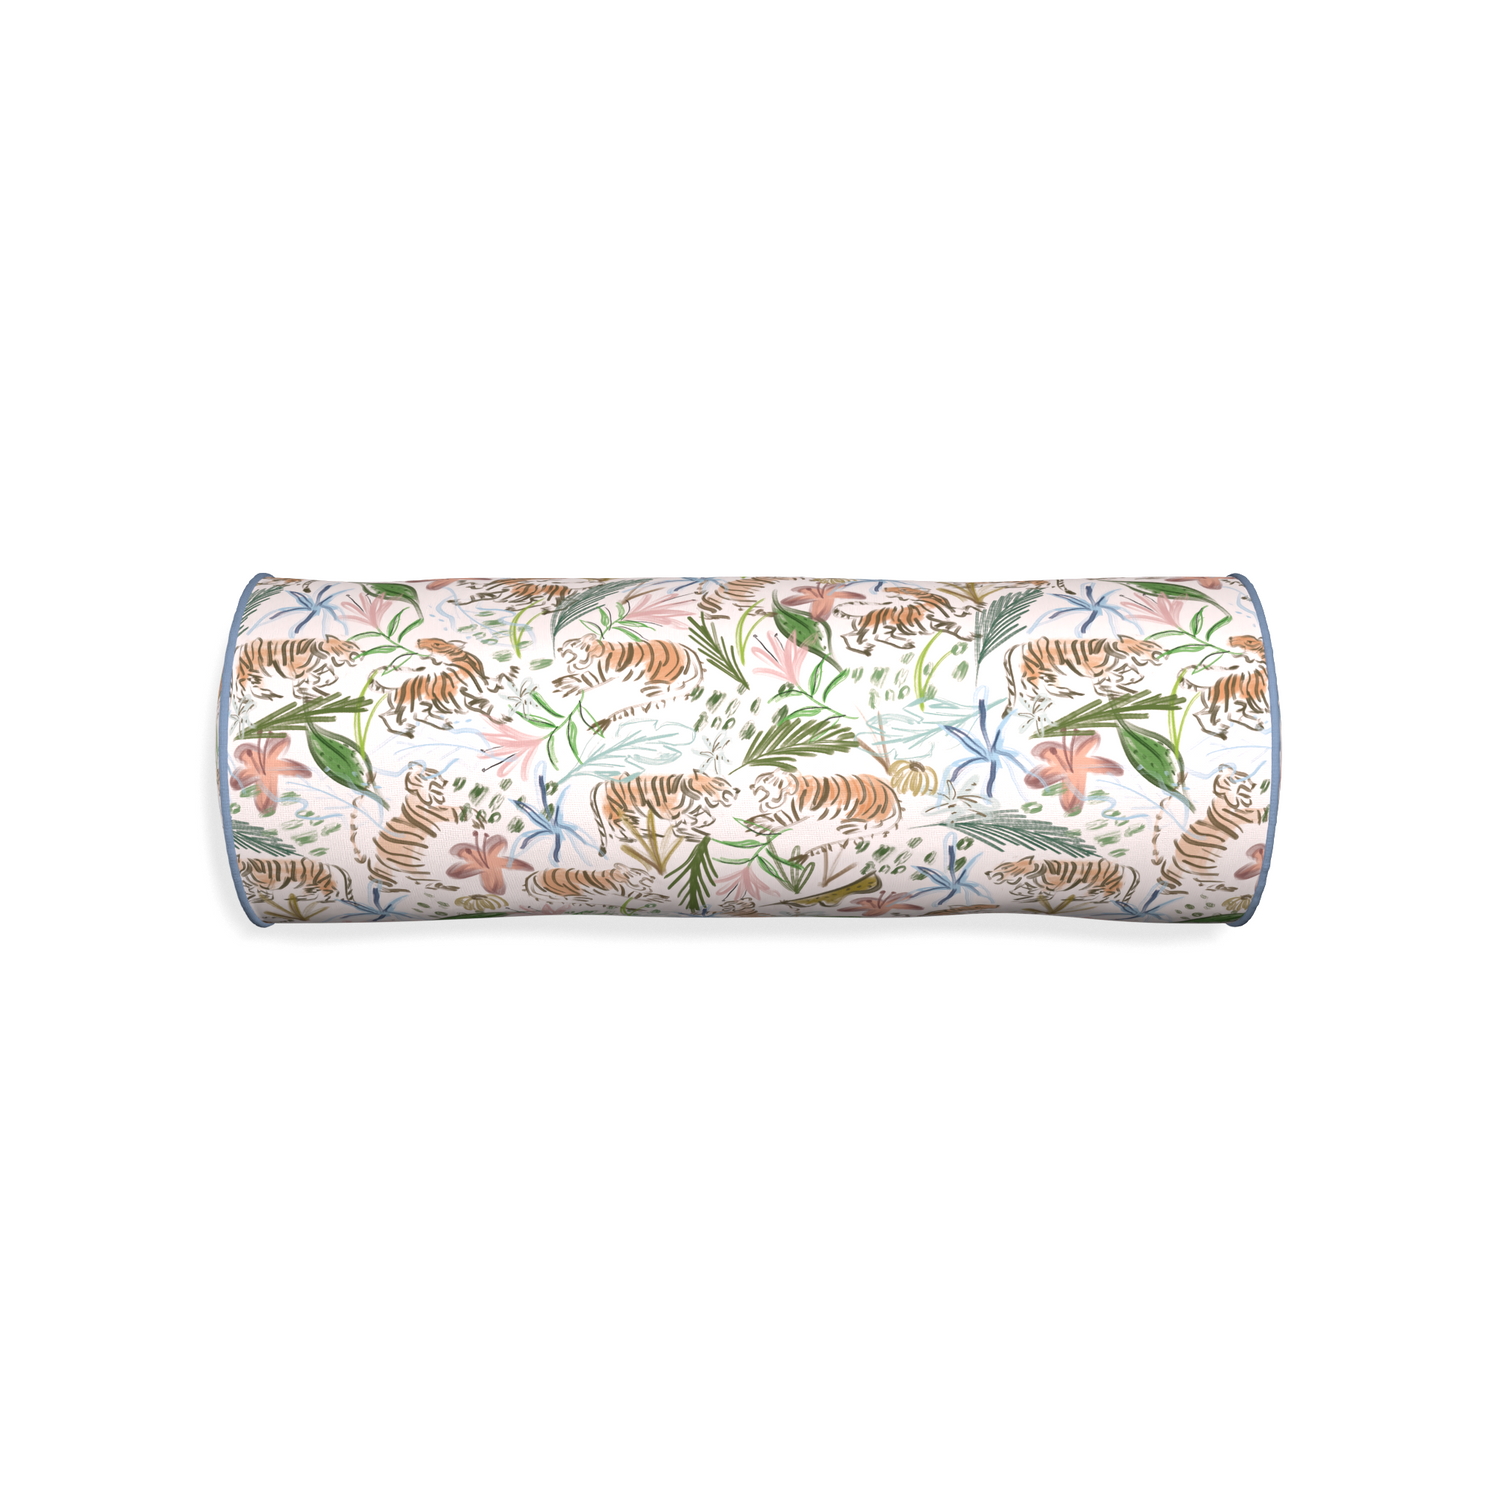 Bolster frida pink custom pink chinoiserie tigerpillow with sky piping on white background